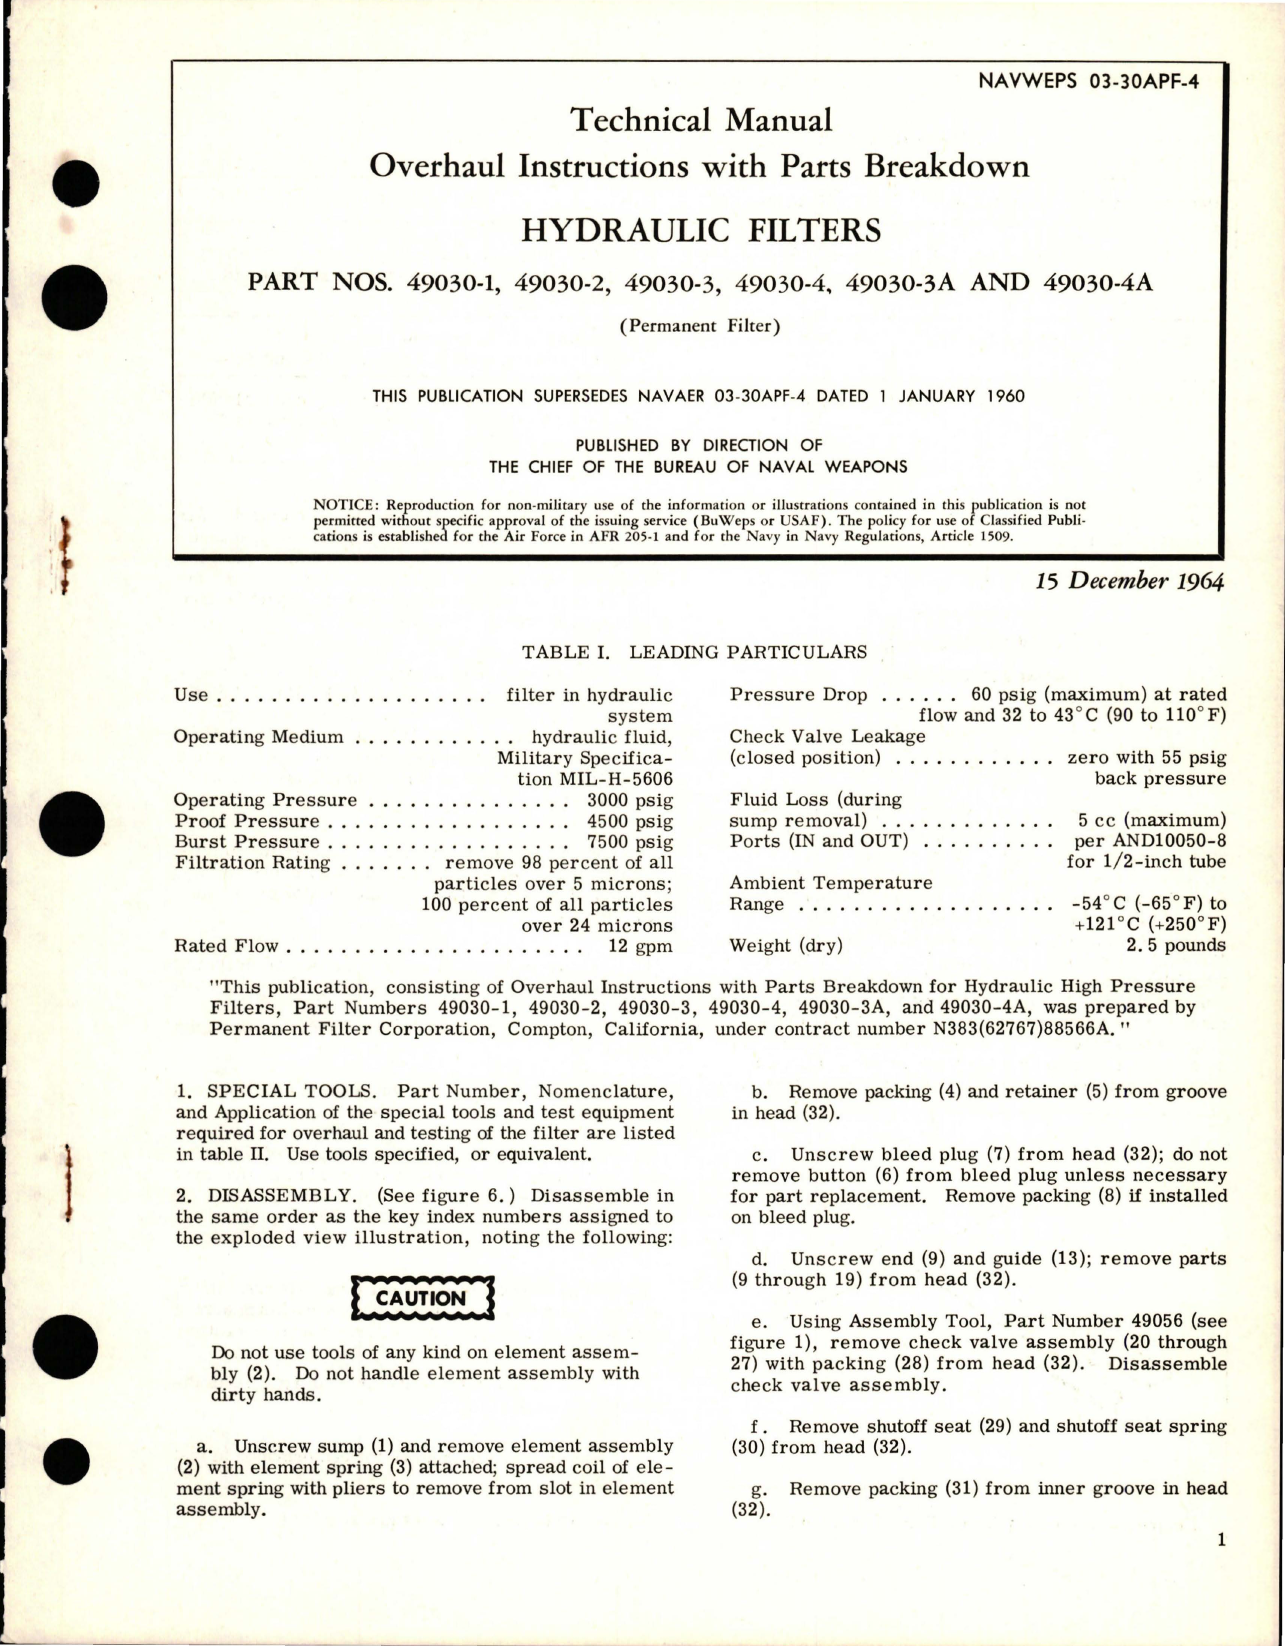 Sample page 1 from AirCorps Library document: Overhaul Instructions with Parts Breakdown for Hydraulic Filters - Parts 4903-1, 4903-2, 4903-3, 4903-4, 4903-3A, and 4903-4A 